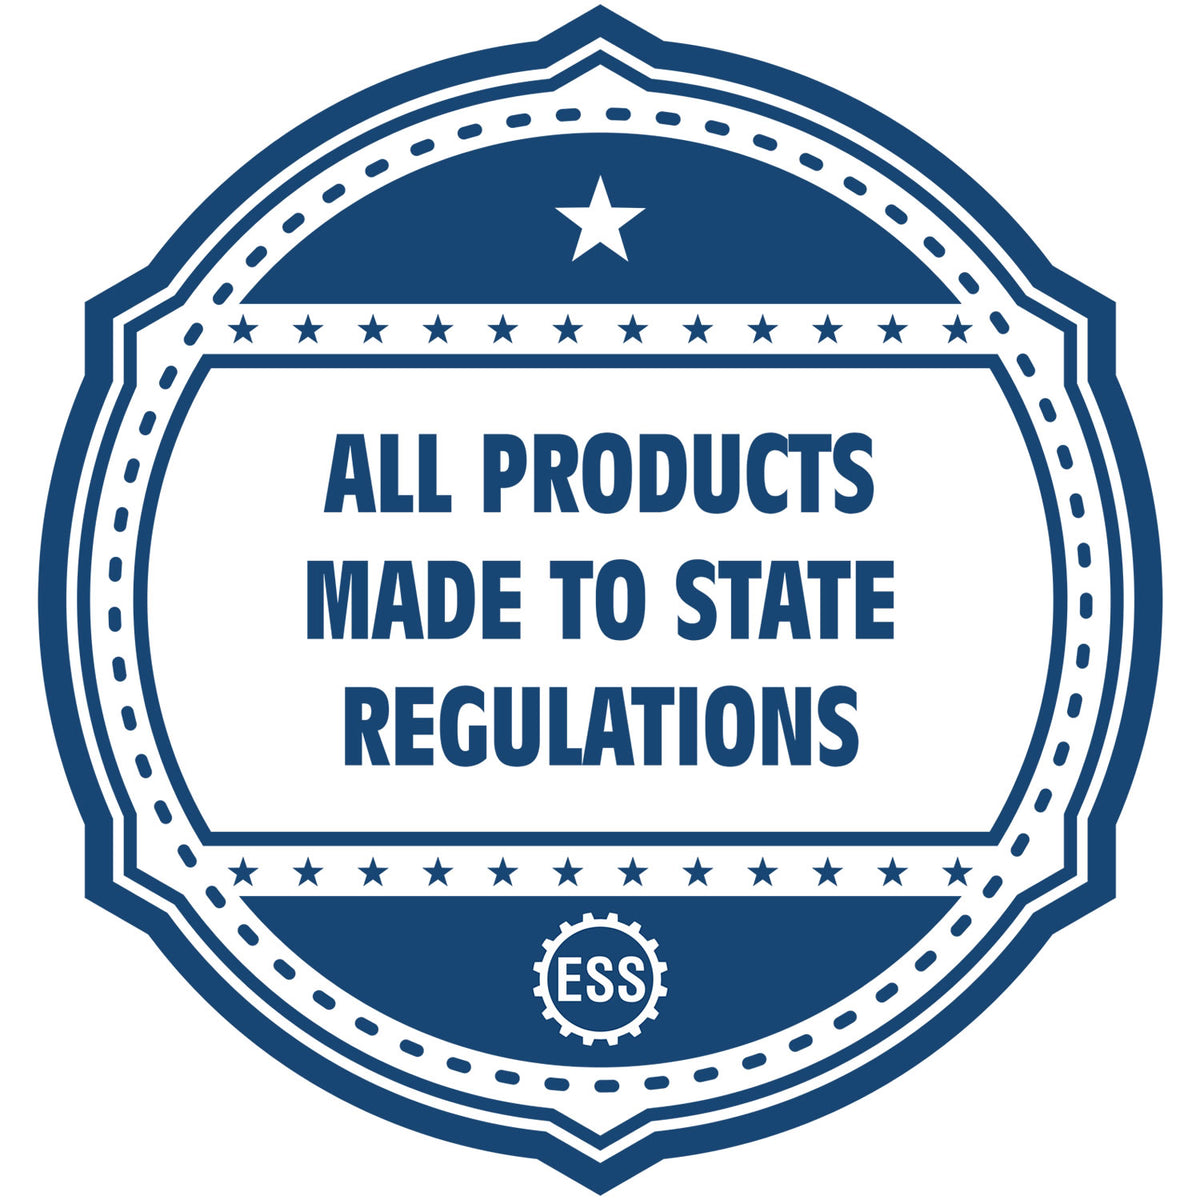 An icon or badge element for the State of Arizona Long Reach Architectural Embossing Seal showing that this product is made in compliance with state regulations.